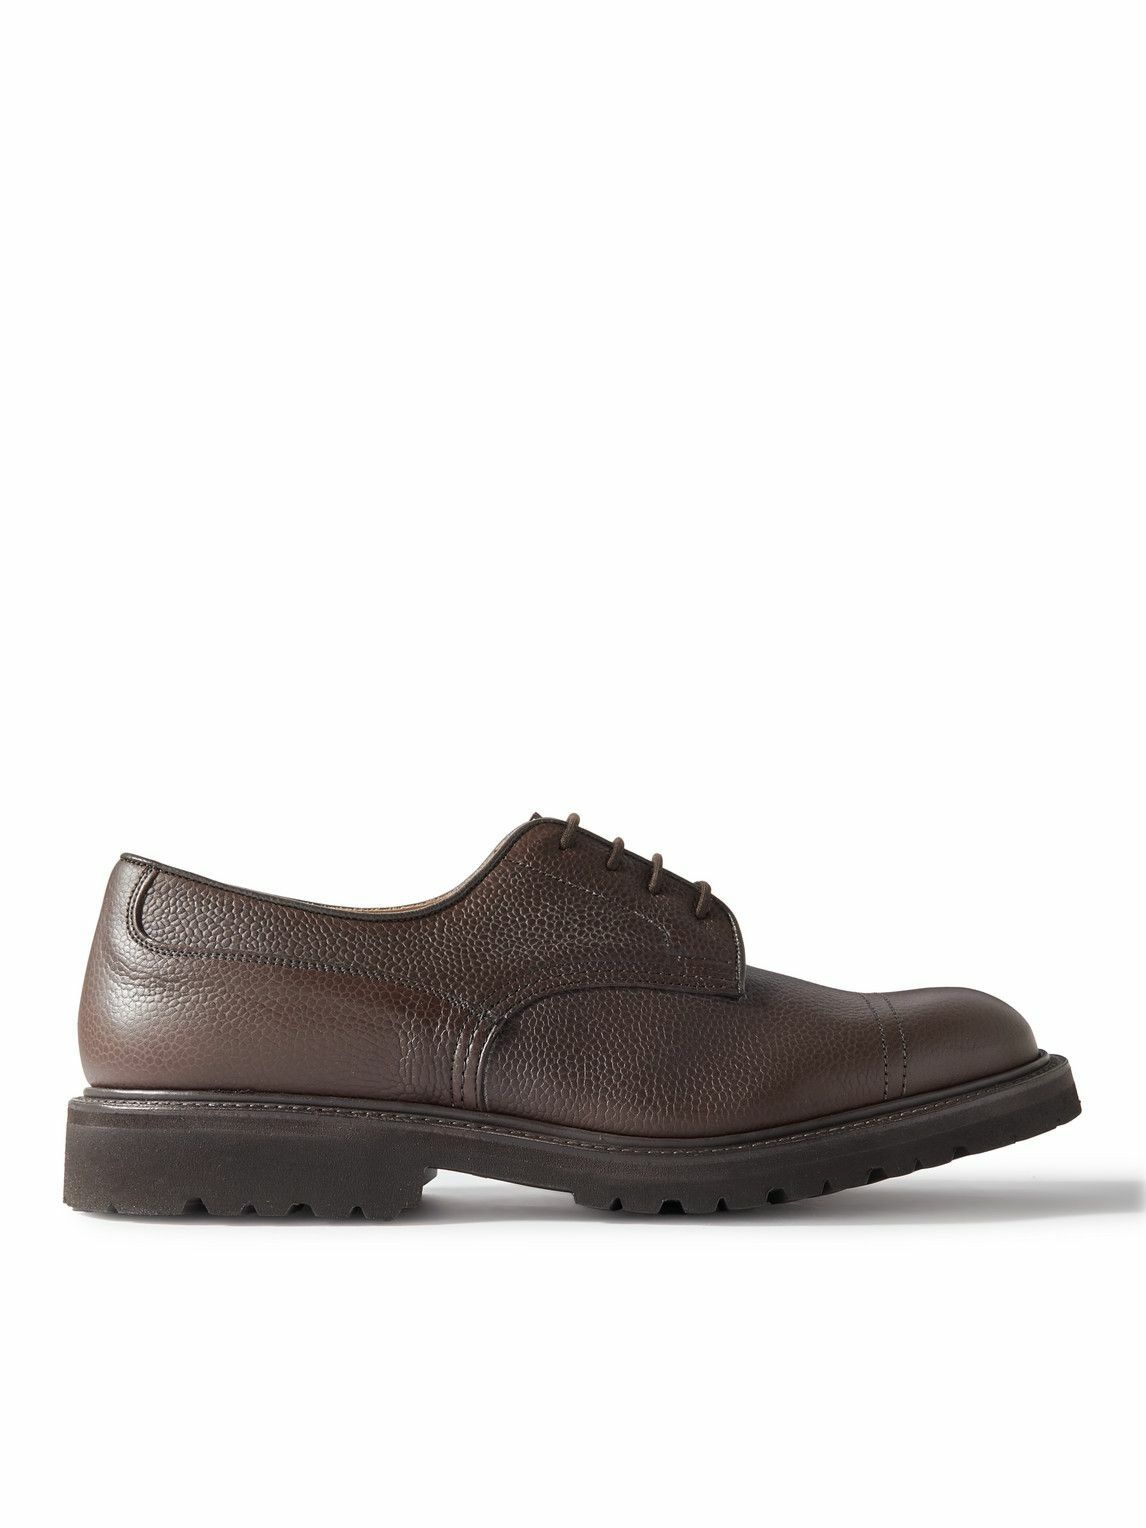 Tricker's - Matlock Full-Grain Leather Derby Shoes - Brown